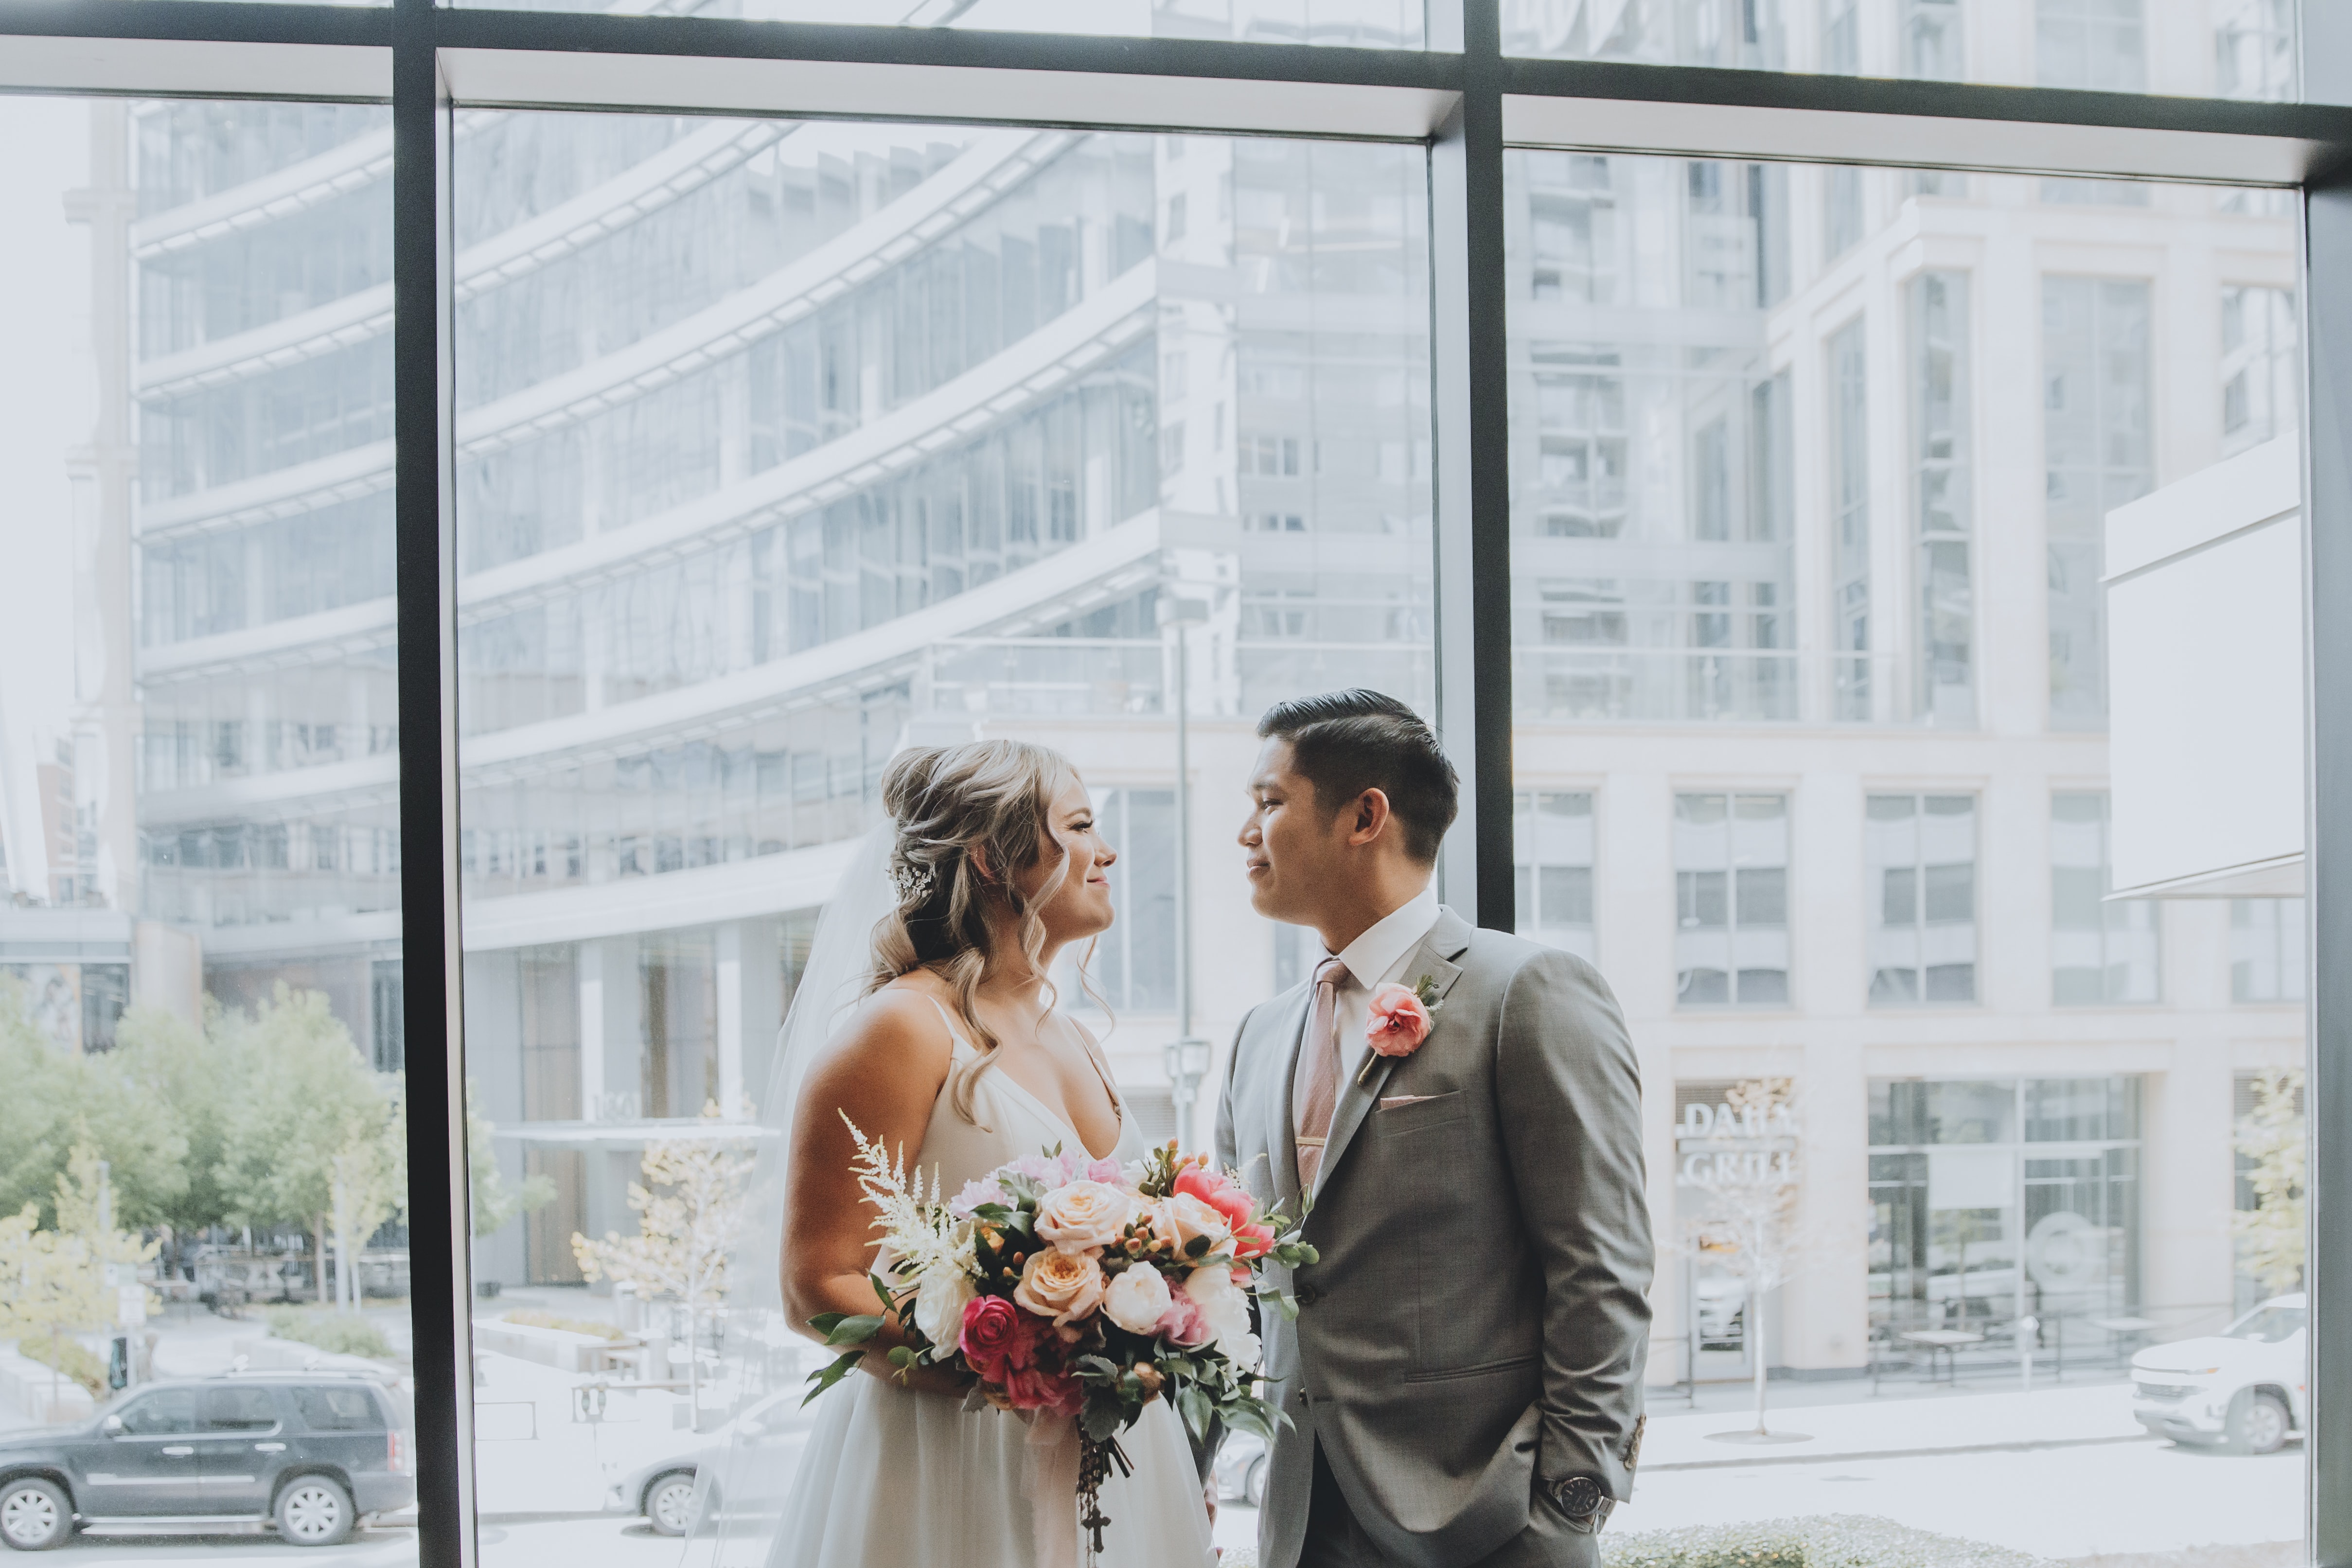 Top 5 Hotels in Chicago to consider for your Wedding